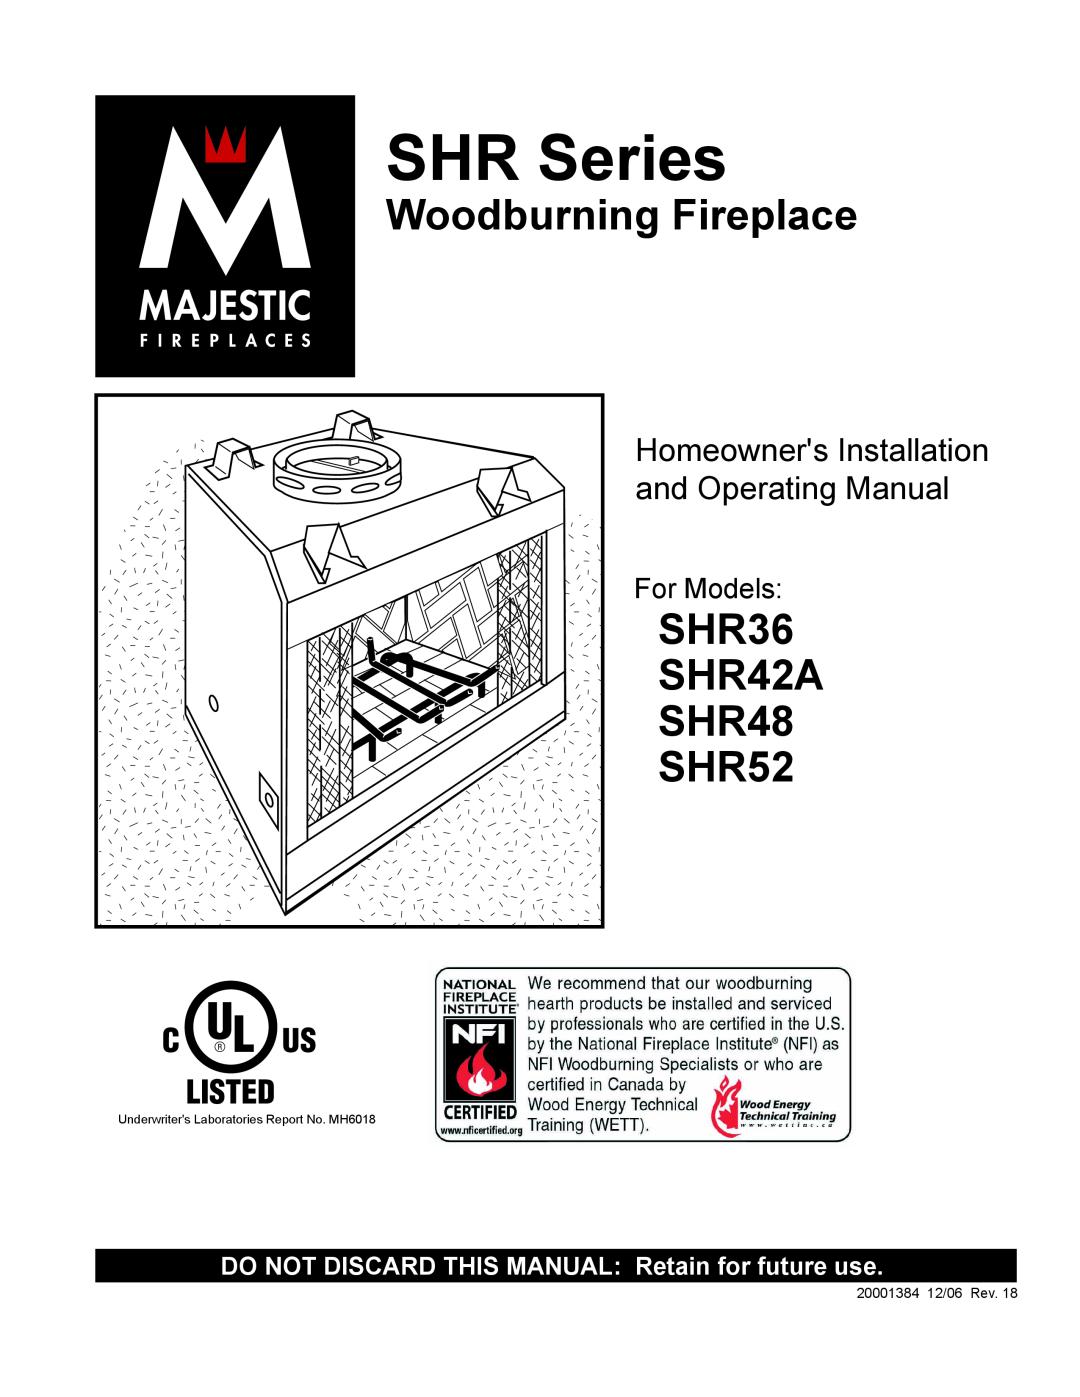 Vermont Casting SHR42A manual Woodburning Fireplace, SHR36, SHR48, SHR52, DO NOT DISCARD THIS MANUAL Retain for future use 